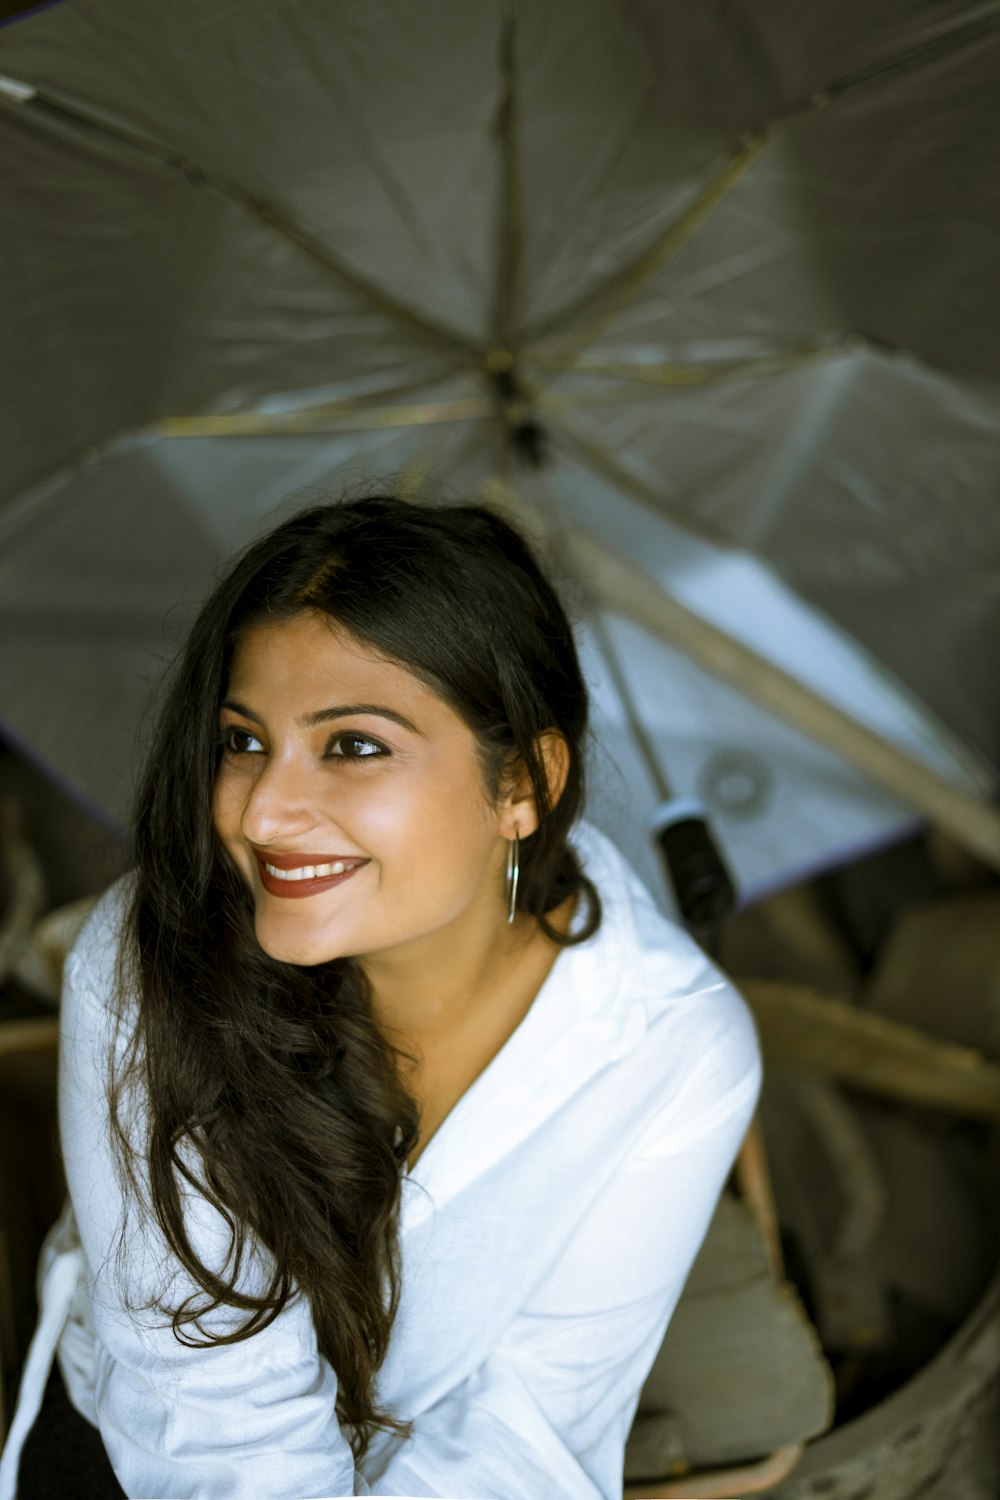 a woman sitting under an umbrella smiling for the camera